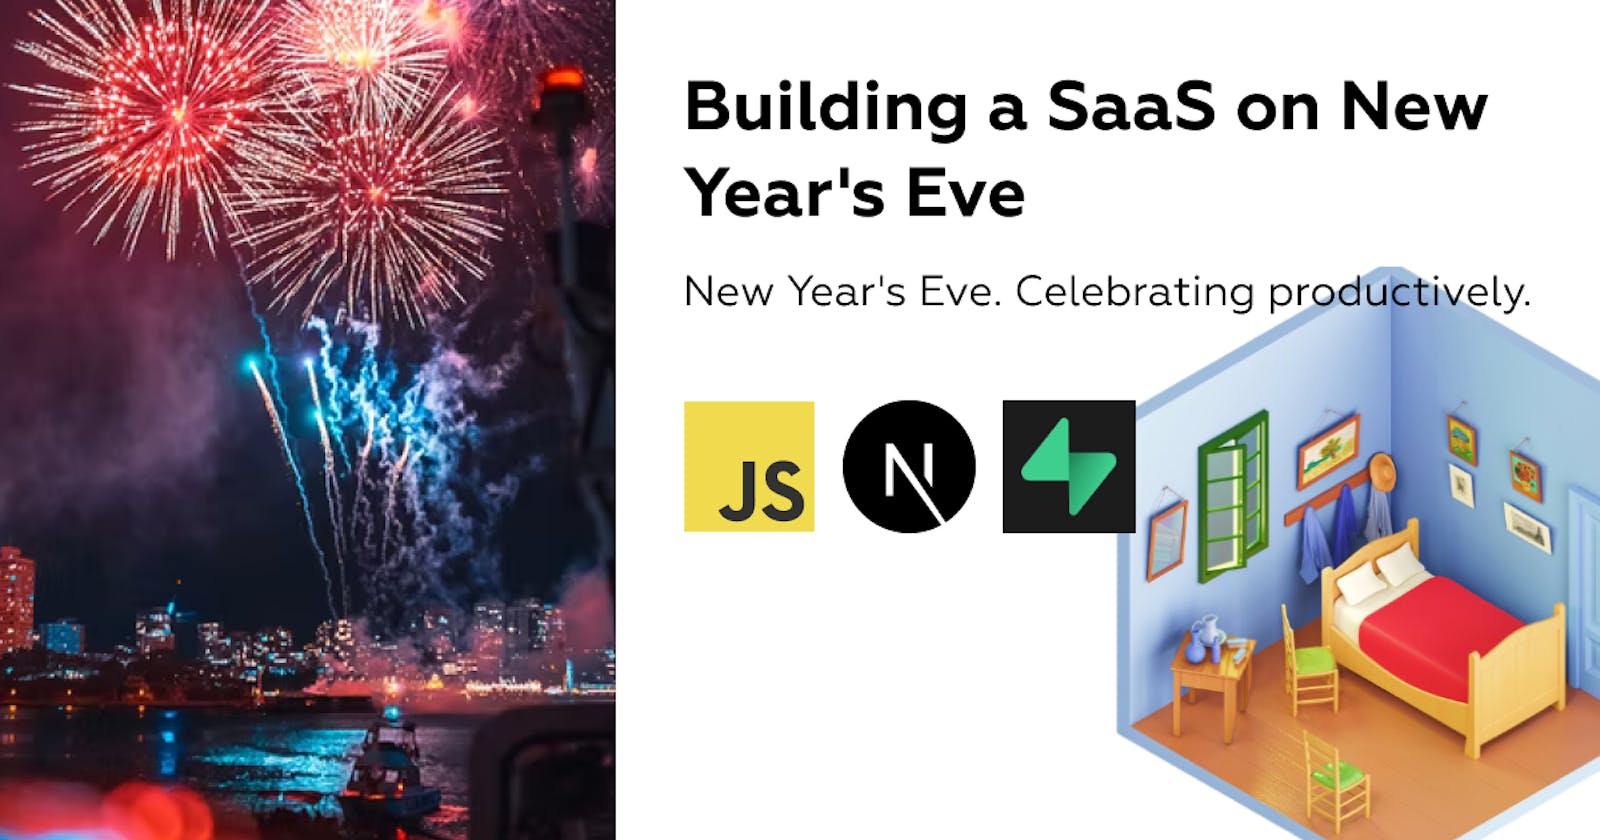 Building a SaaS on New Year’s Eve